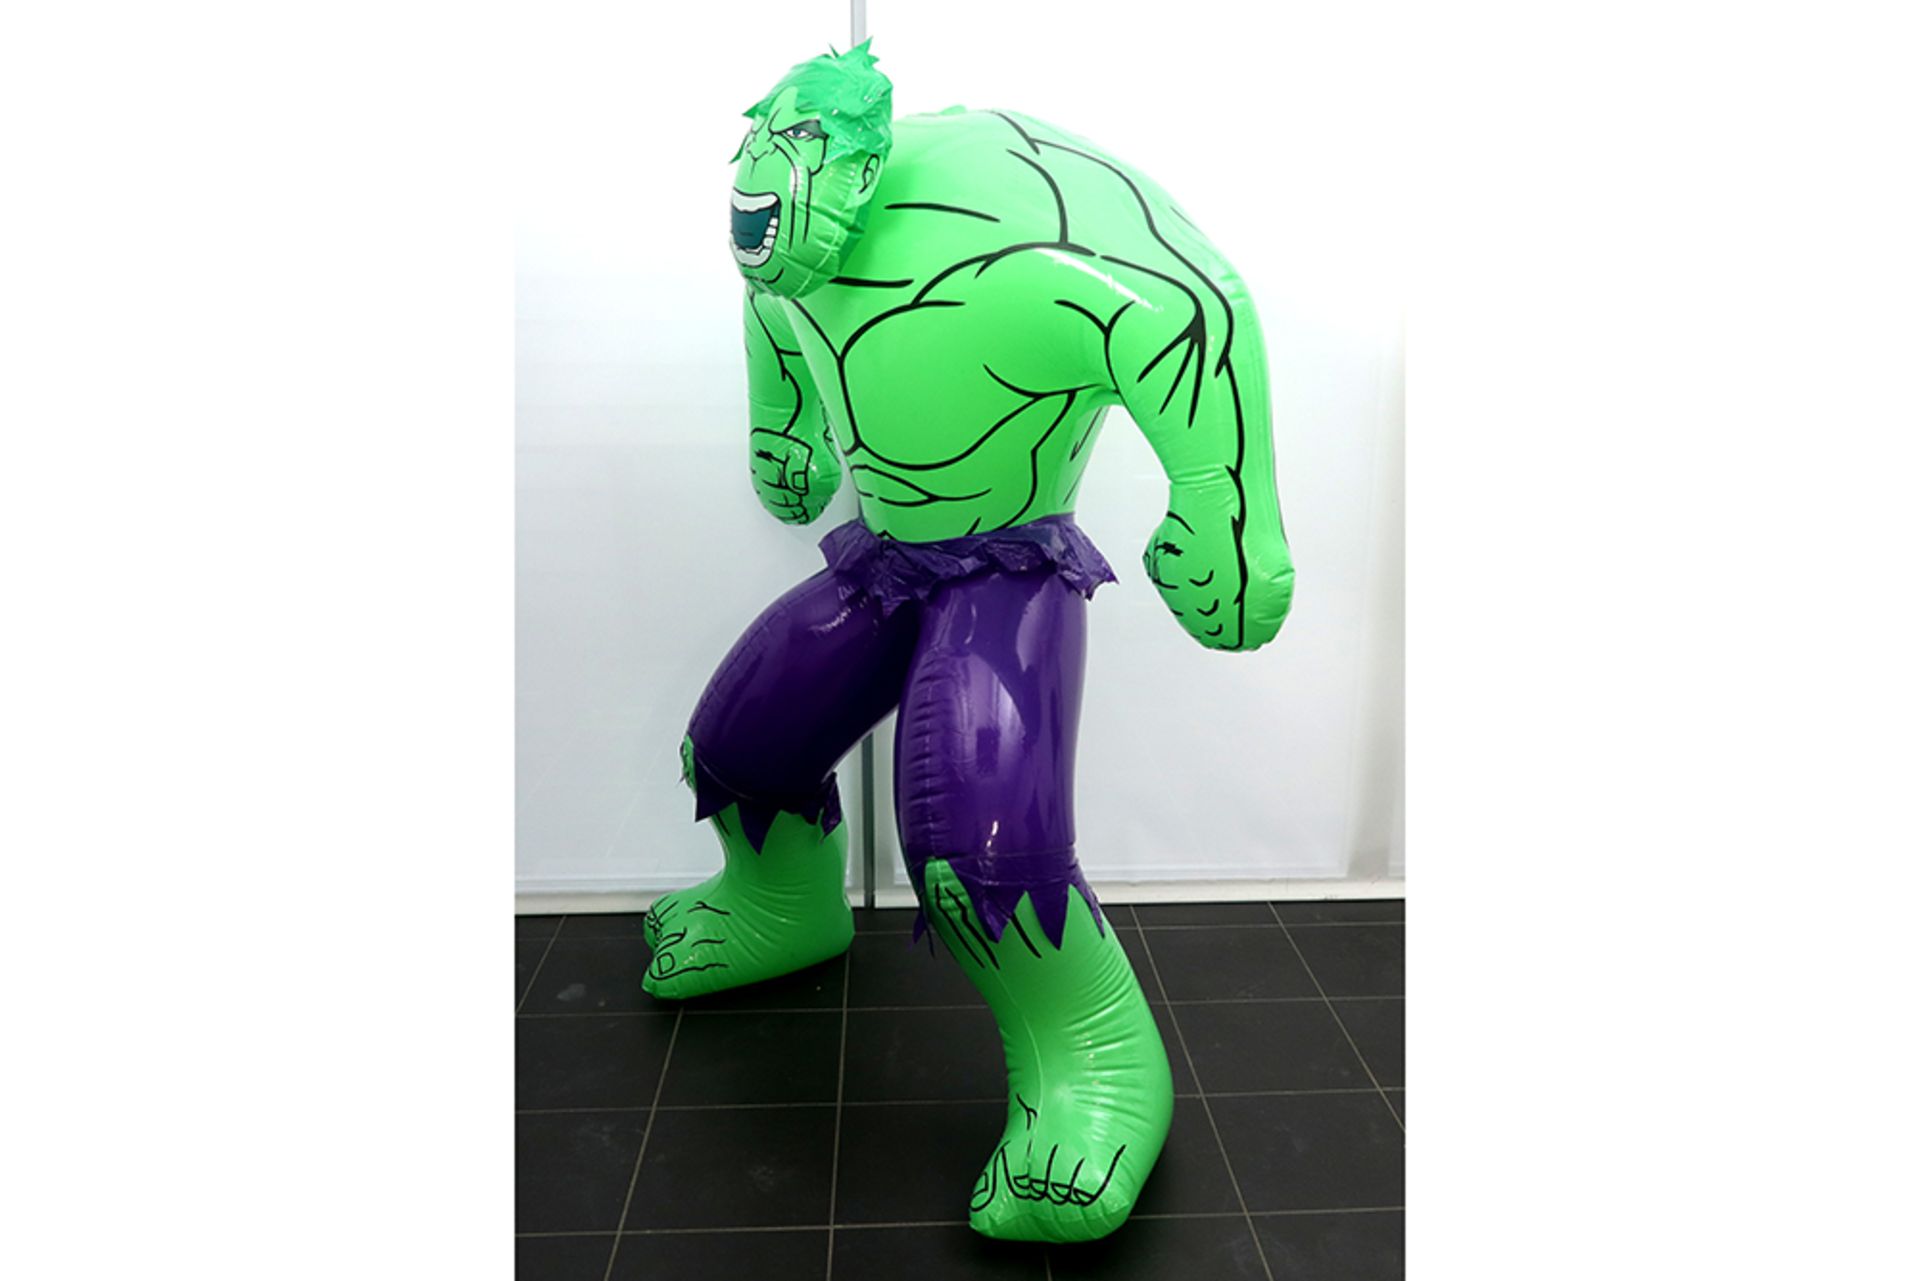 eff Koons "The Hulk" (inflatable) plastic sculpture - edition by Marvel dd 2003 these sculptures - Image 4 of 5